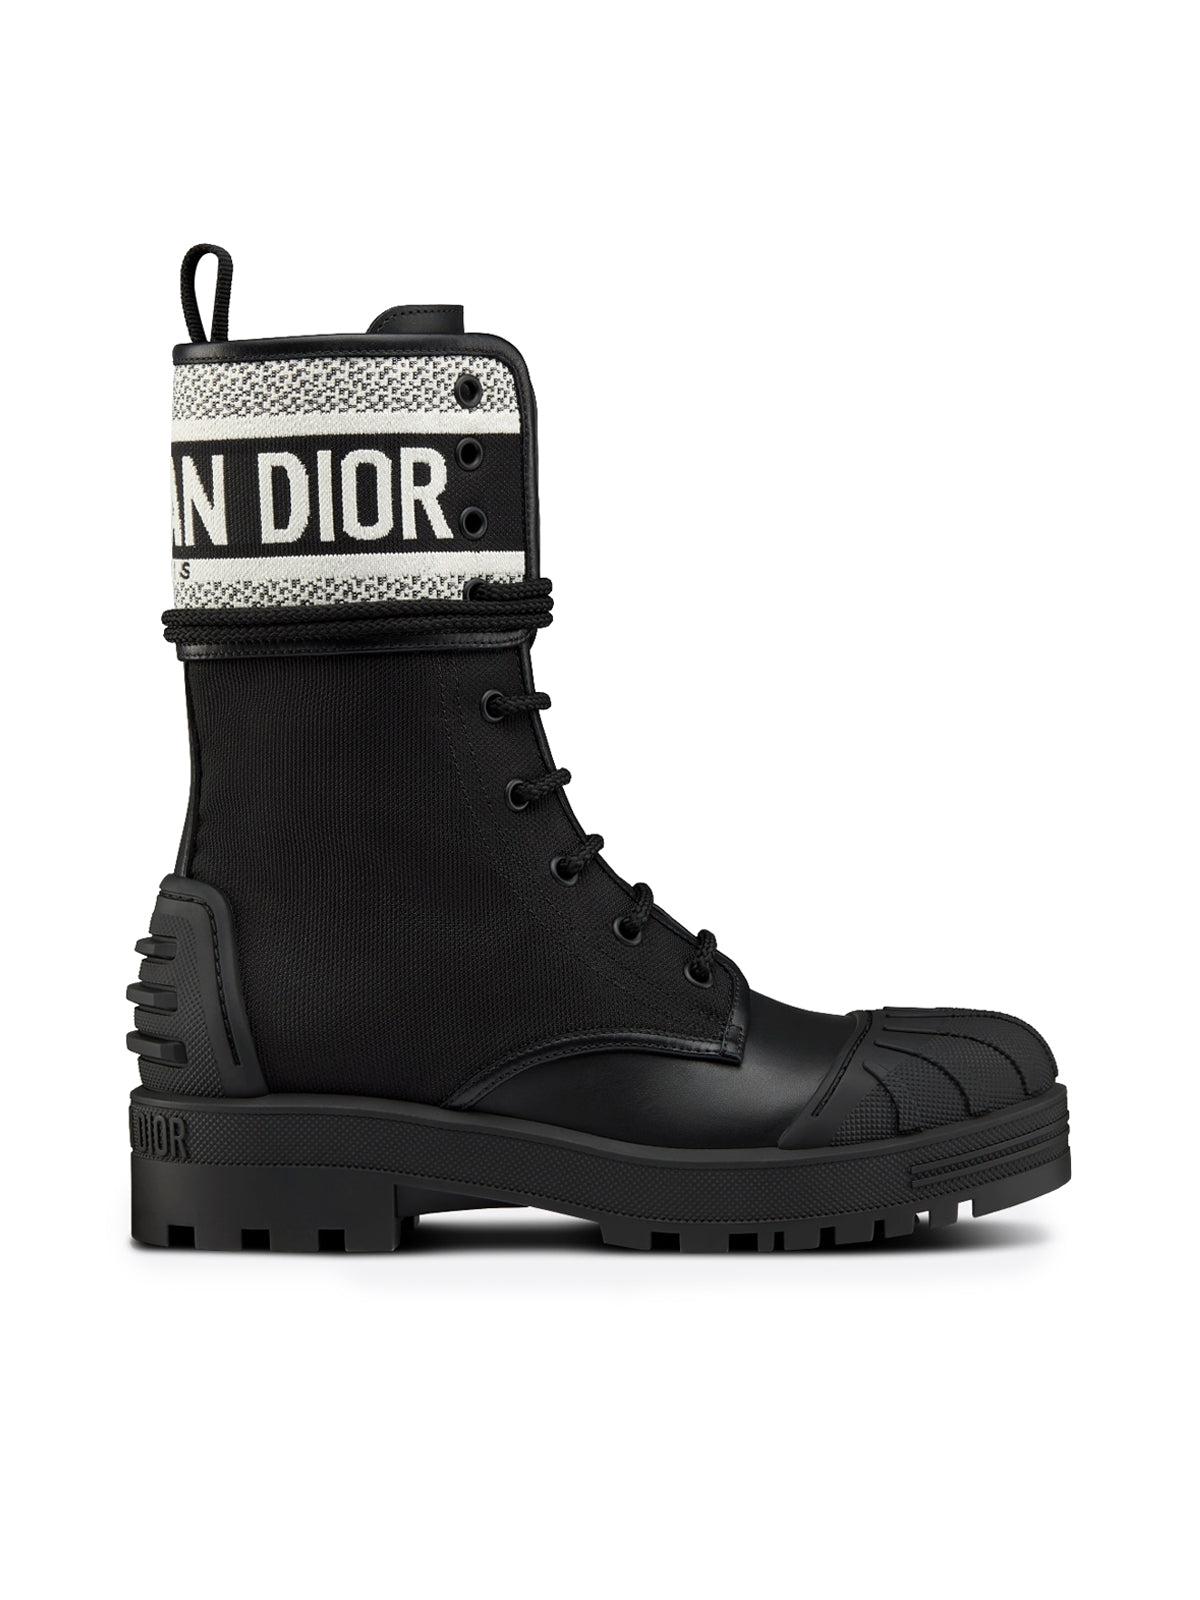 Christian Dior D-Major Boot and Technical Fabric Boots